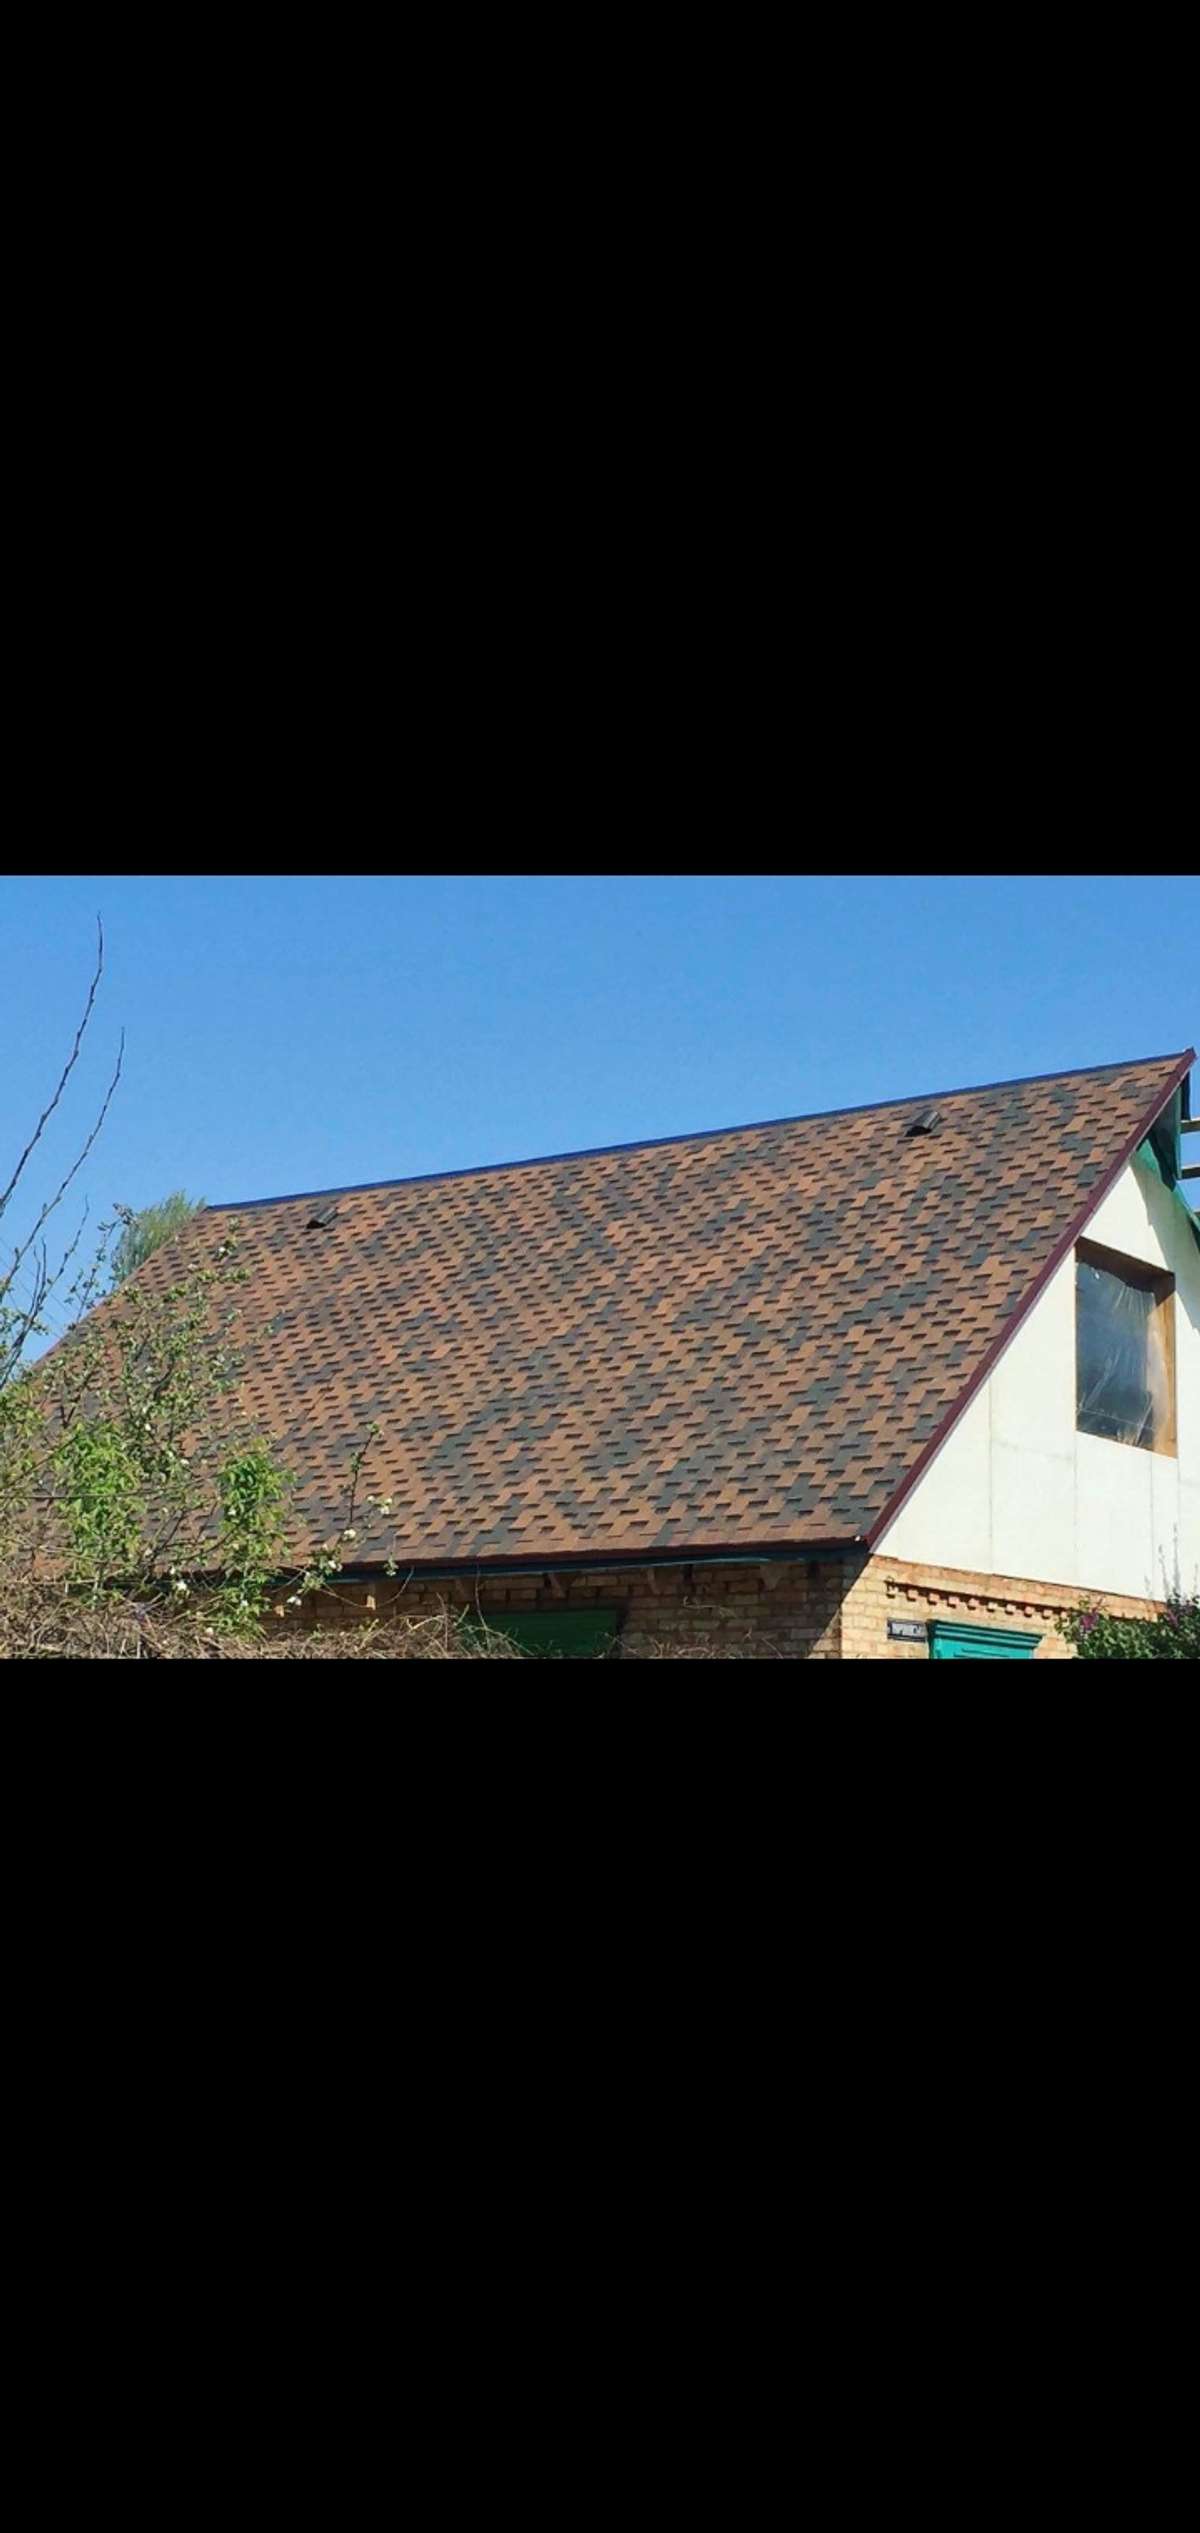 Designs by Building Supplies NJ Roofing, Kozhikode | Kolo